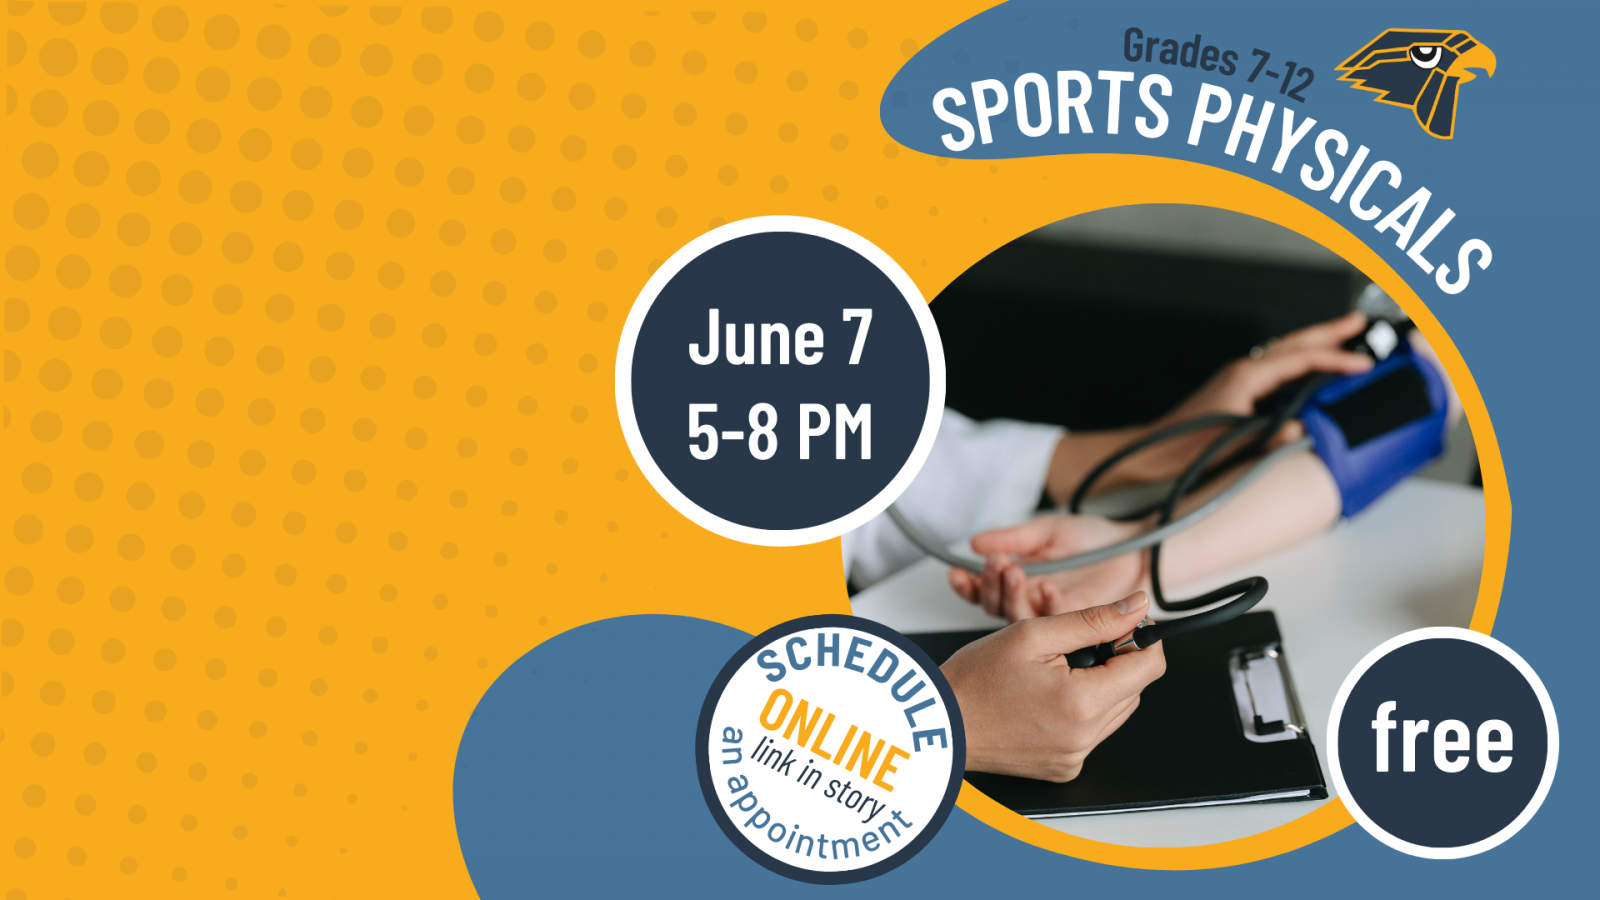 Free sports physicals on June 7 between 5 to 8 PM. Schedule an appointment online.